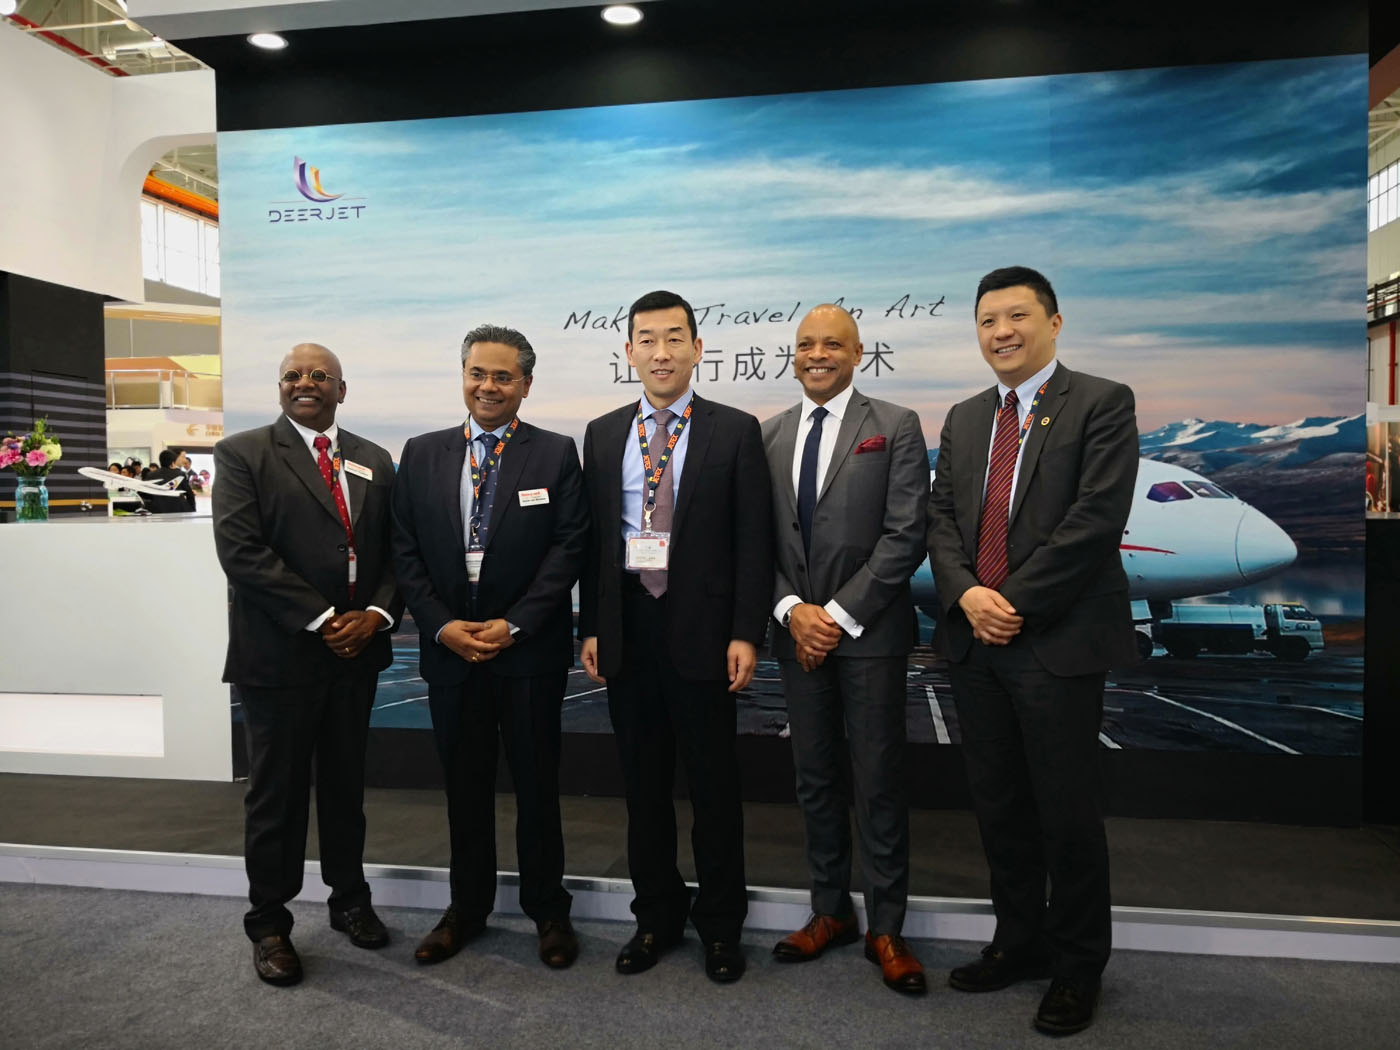 Zhou Jinshan, Vice President of maintenance, Deer Jet (Middle) and Frank Fang, Vice President of Branding, Deer Jet (First from Right) with seniors from Honeywell Aerospace Asia Pacific